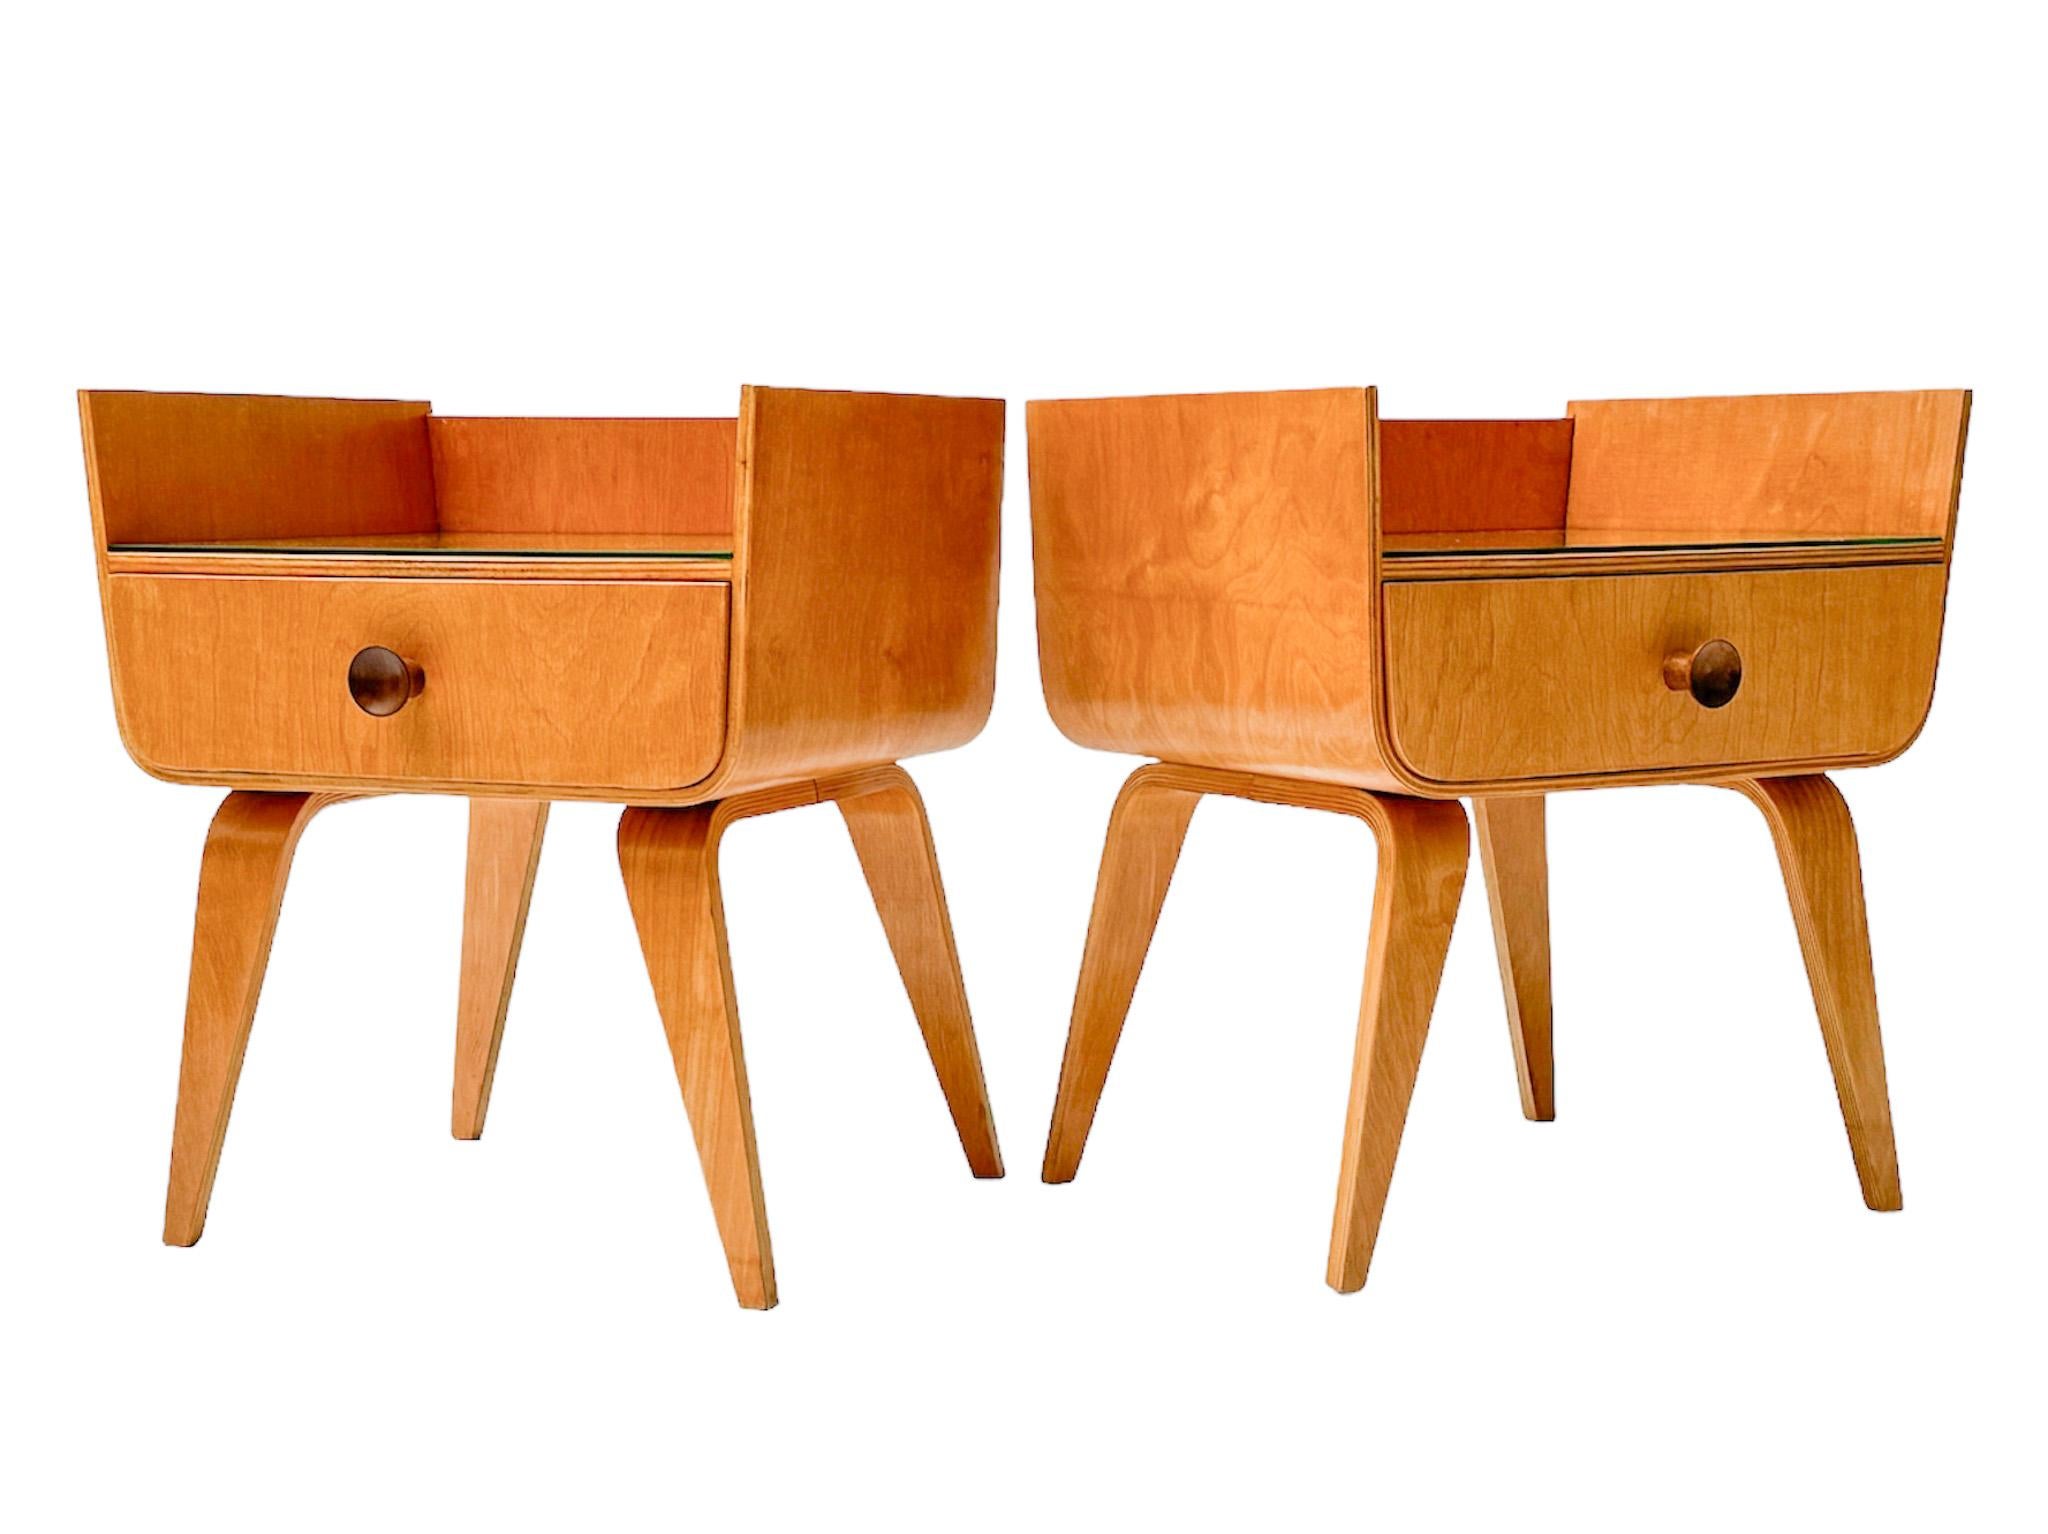 Dutch  Birch Mid-Century Modern Nightstands or Bedside Tables by Cor Alons, 1949